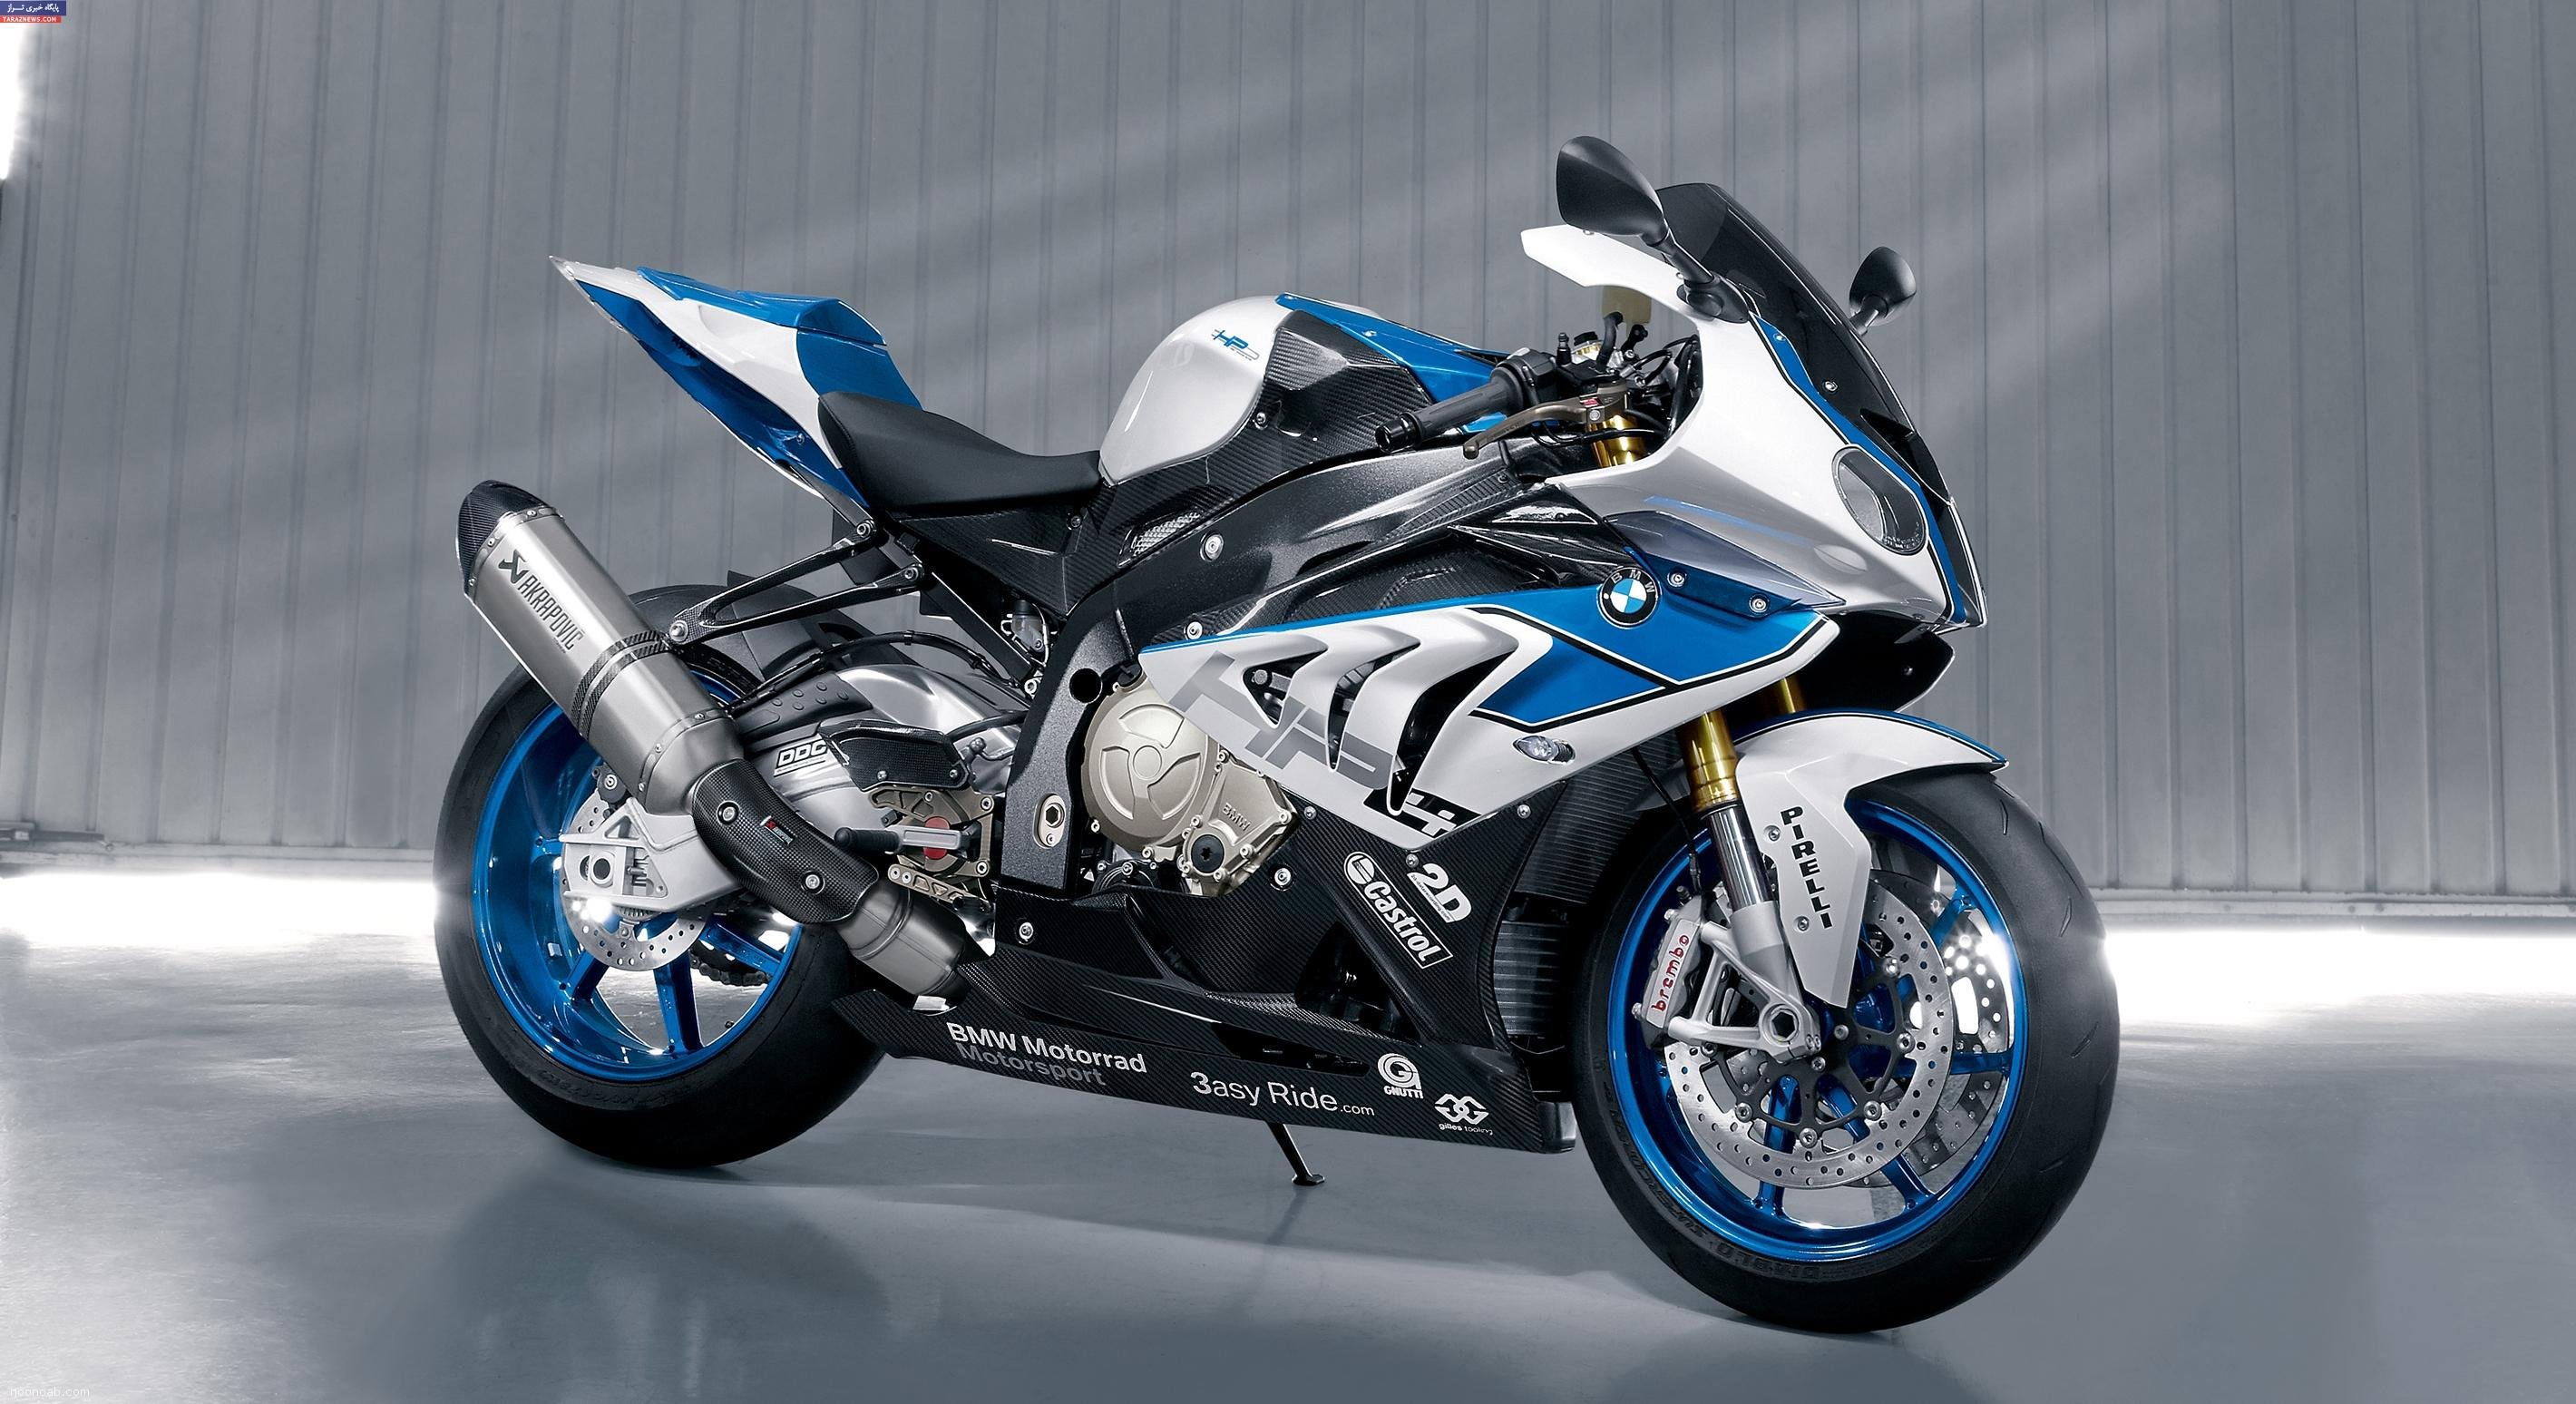 bmw, S1000rr, Superbike, Bike, Muscle, Motorbike Wallpapers HD / Desktop and Mobile Backgrounds